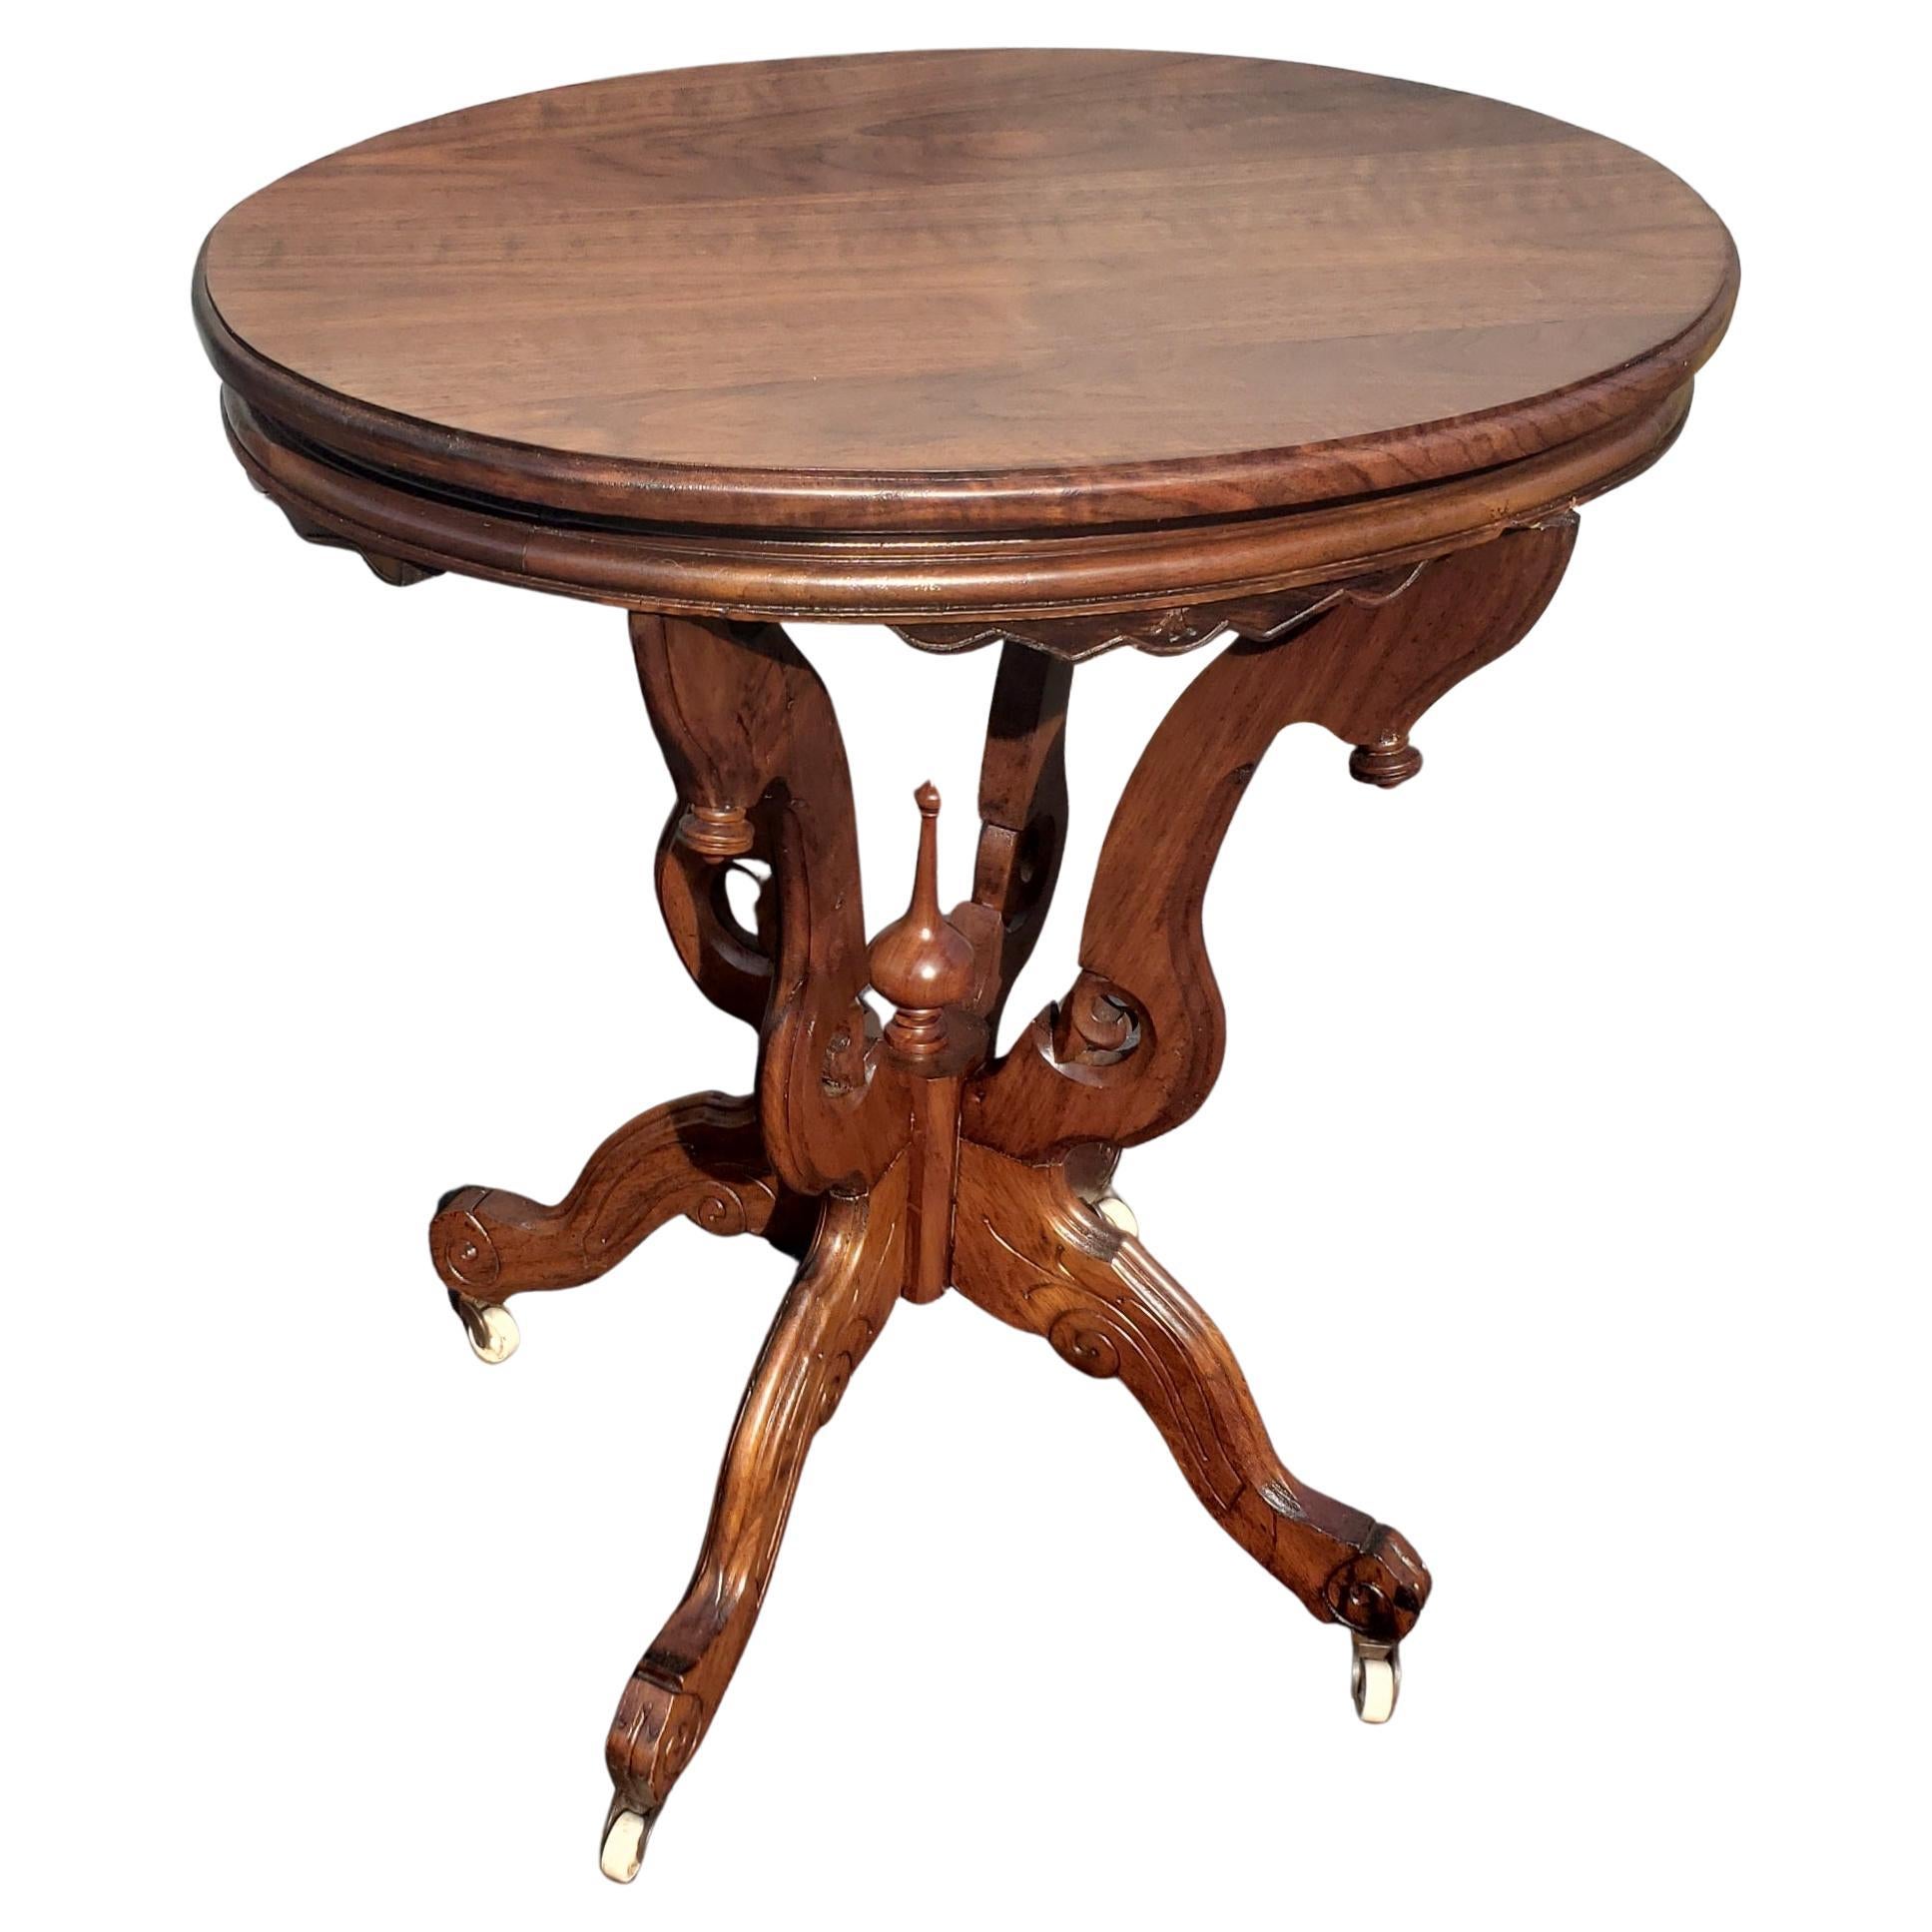 Hand-Crafted Early 1900s Solid Walnut Victorian Oval Accent Table, Tea Table on Wheels